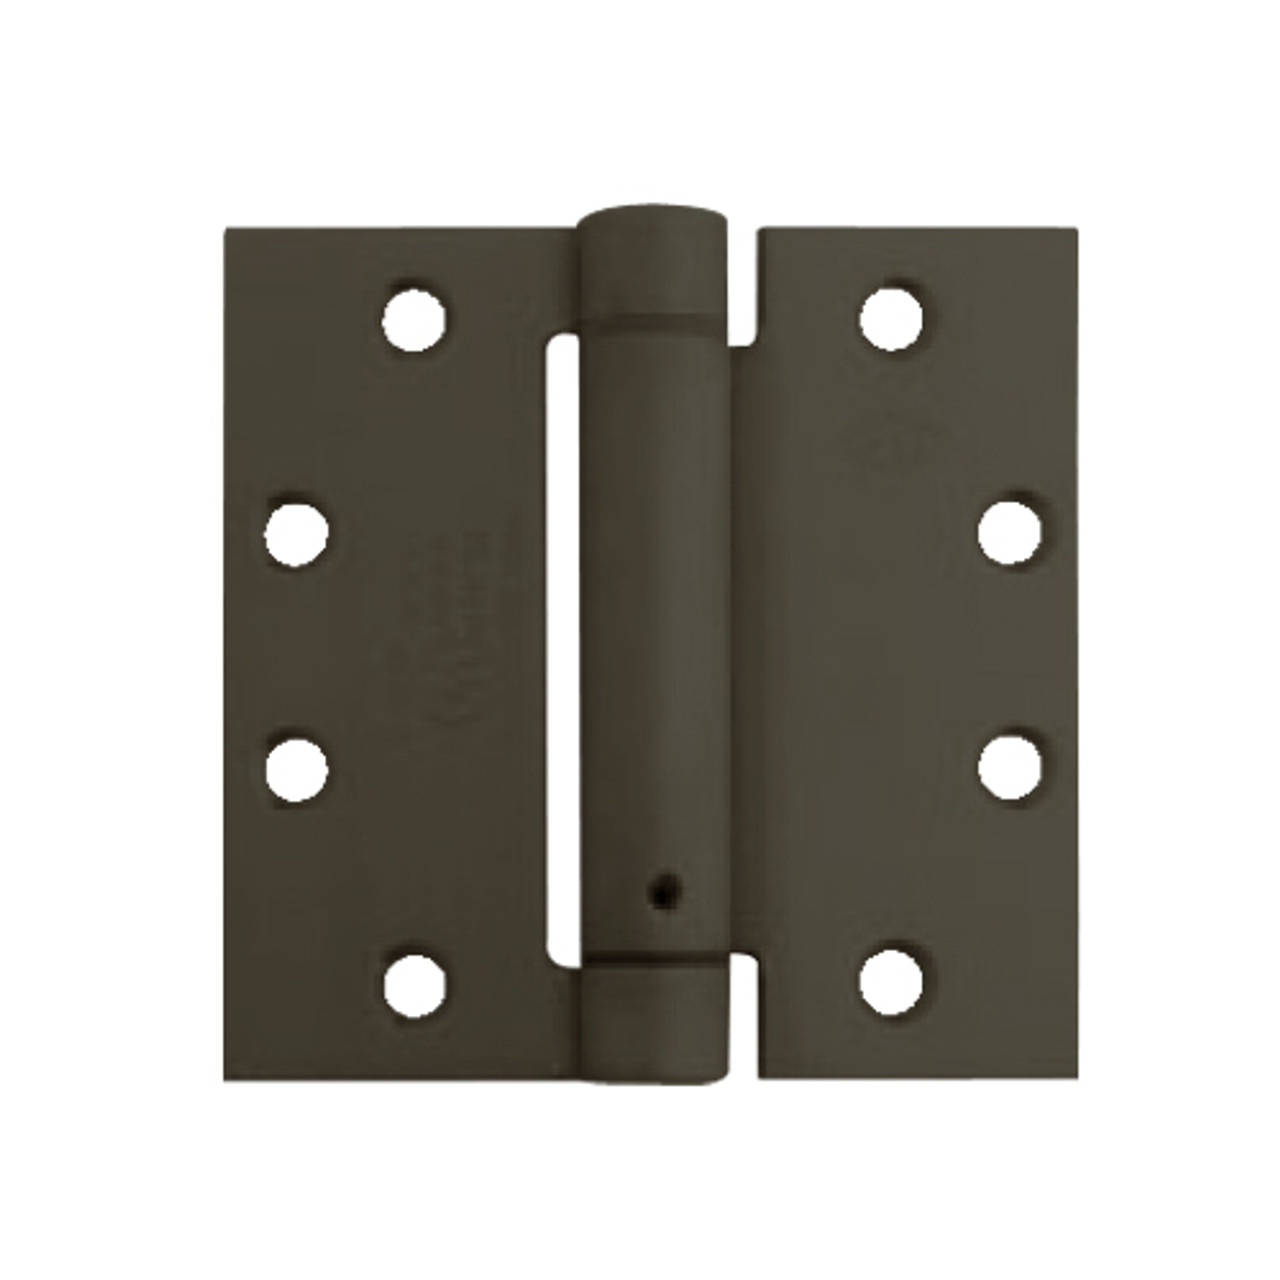 3SP1-4-5x4-641 IVES 3 Knuckle Spring Full Mortise Hinge in Oxidized Satin Bronze